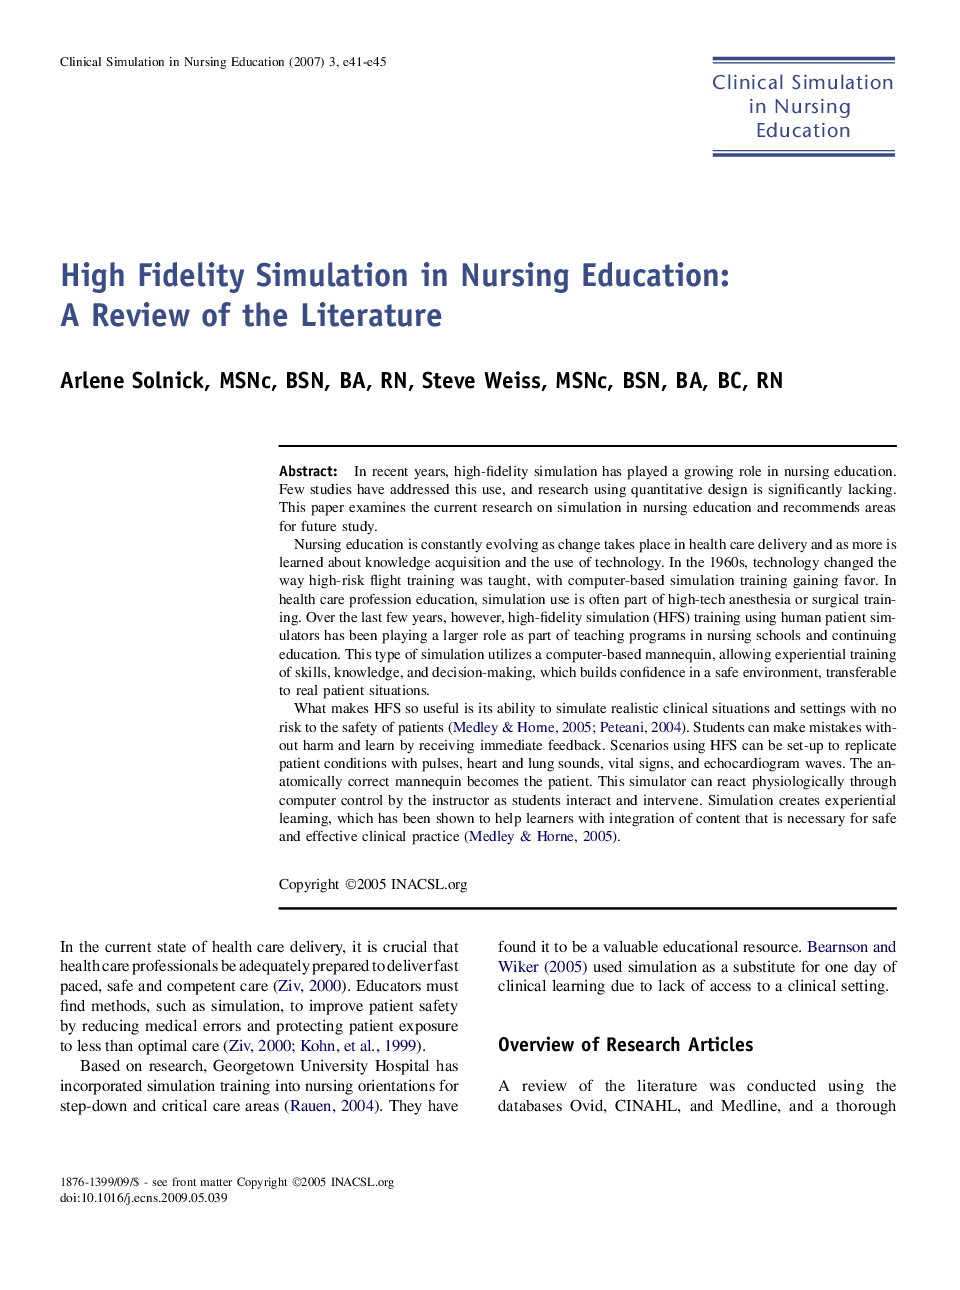 High Fidelity Simulation in Nursing Education: A Review of the Literature